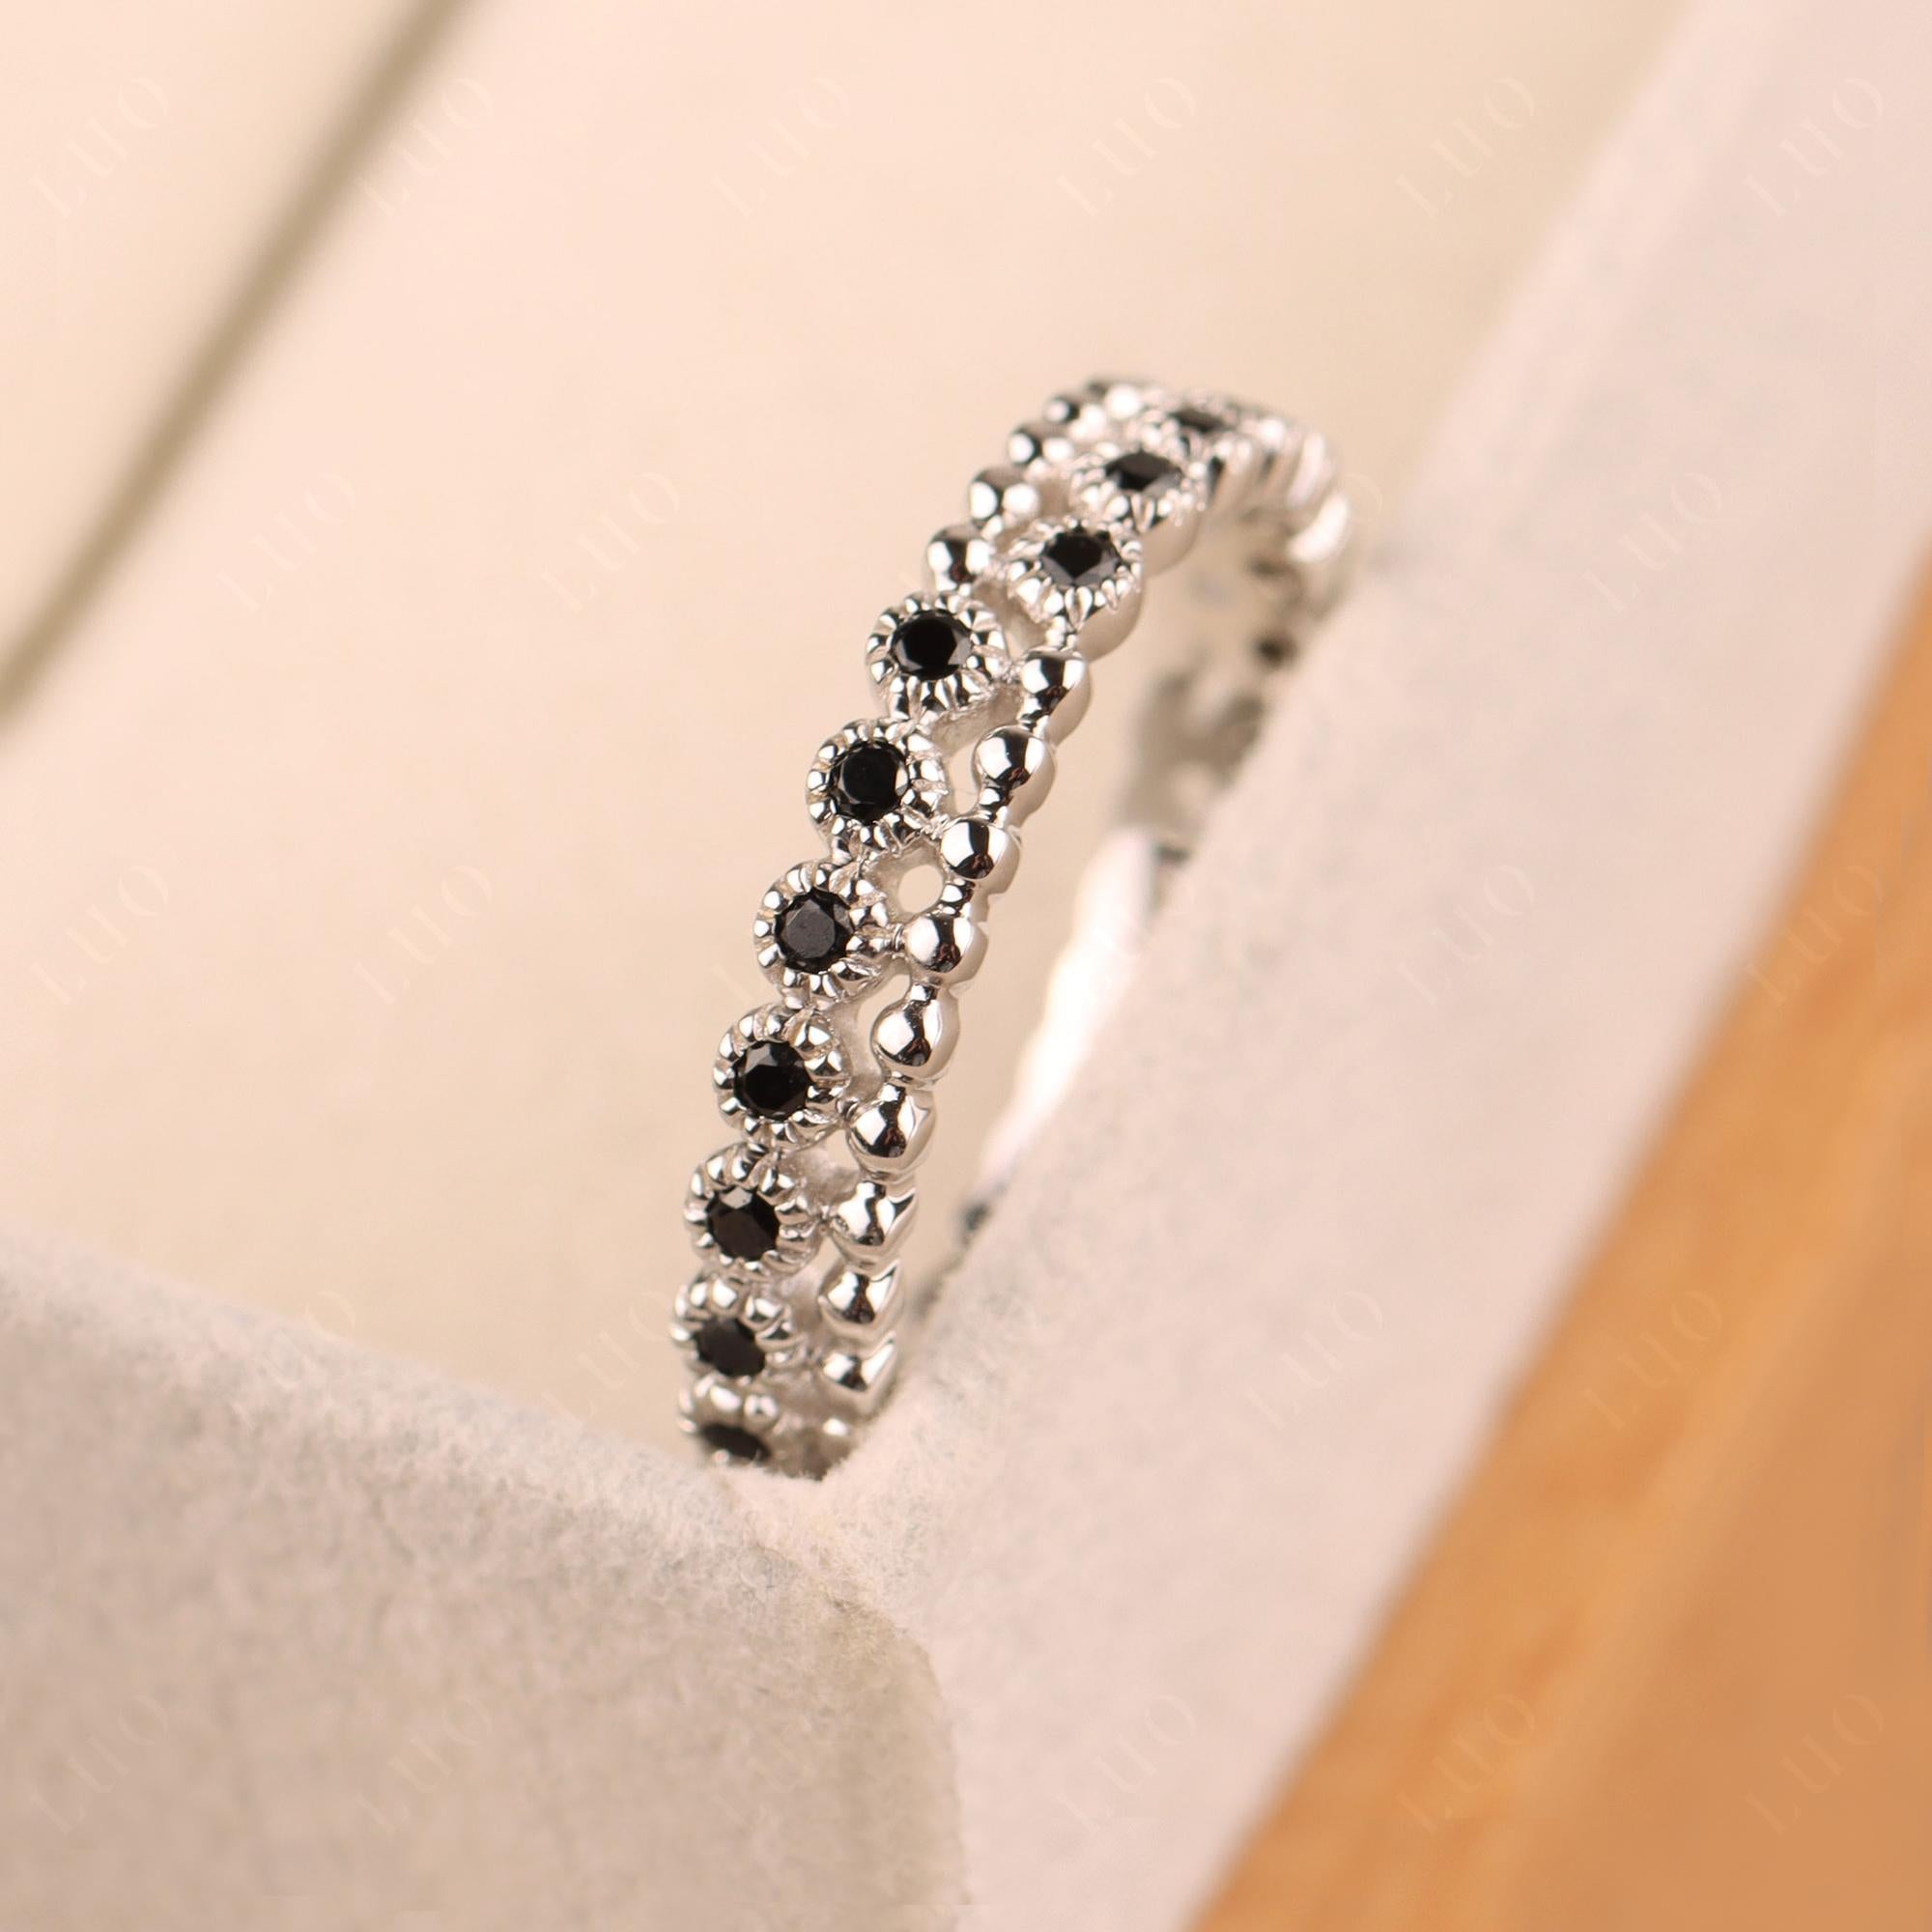 Vintage Inspired Black Spinel Eternity Ring - LUO Jewelry